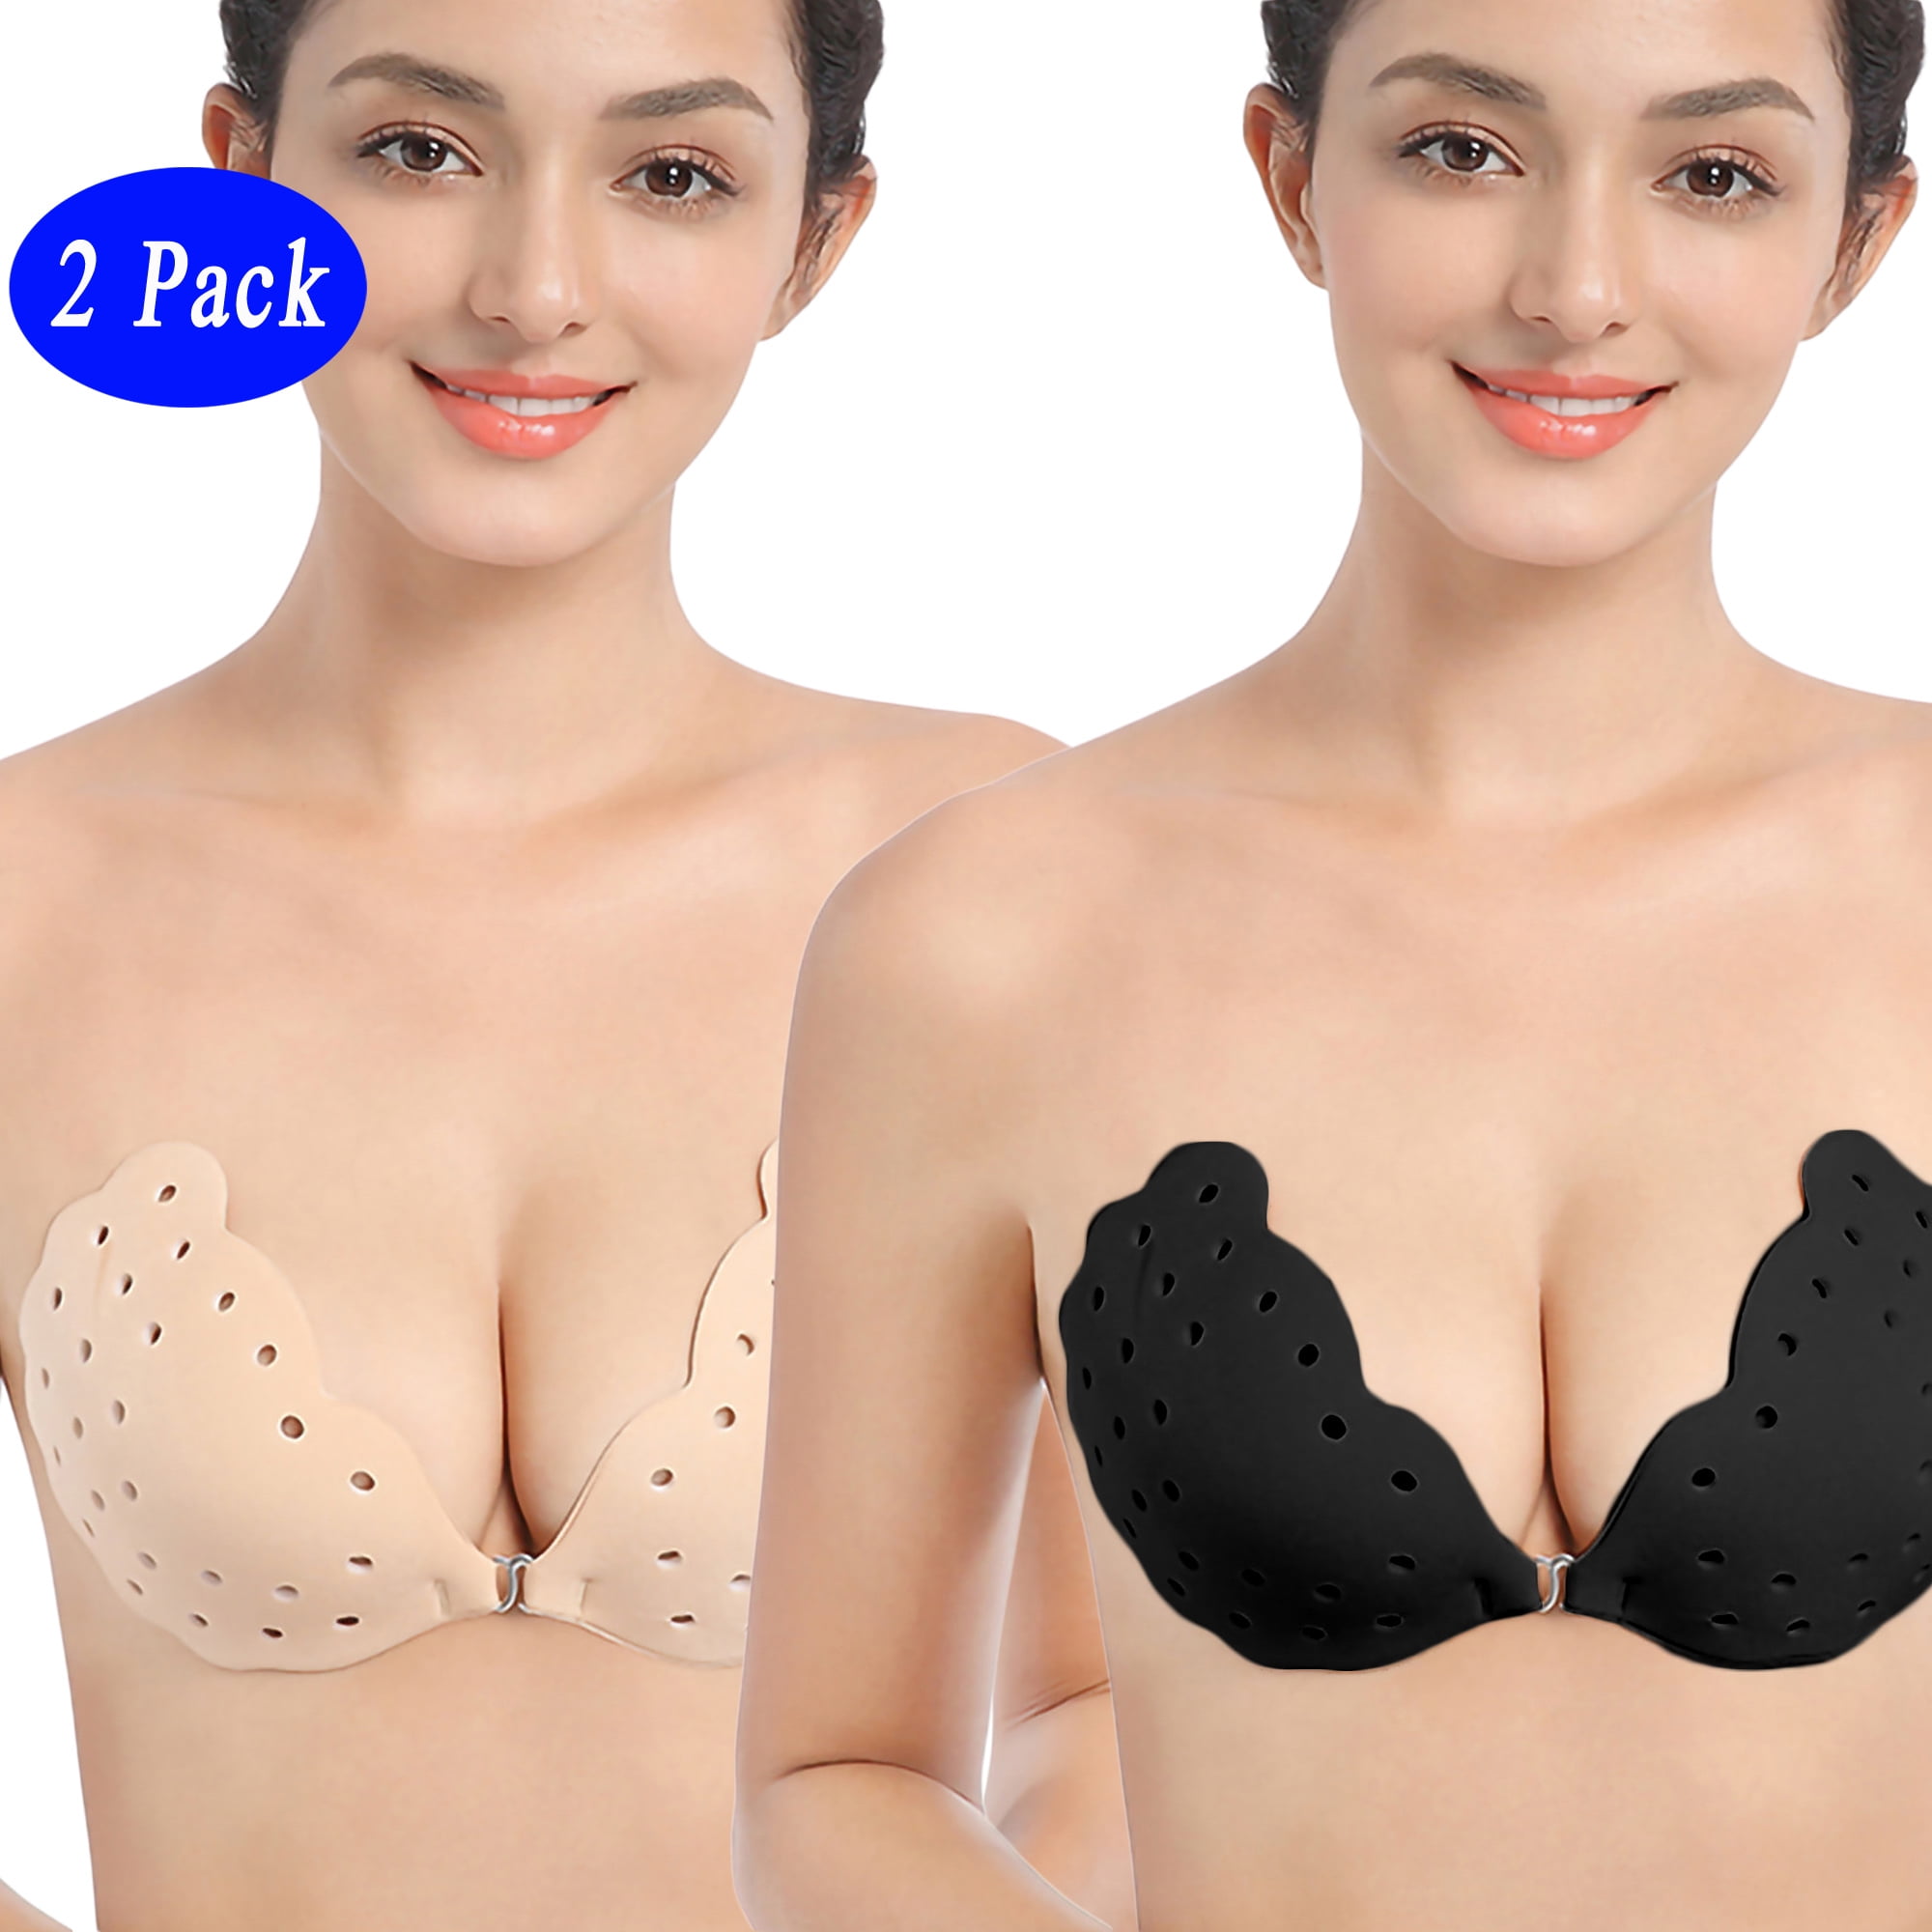 Aisprts Invisible Adhesive Bra 2 Pack Sticky Bra Reusable Push Up Invisible Women Bra Drawstring Silicone Bras 